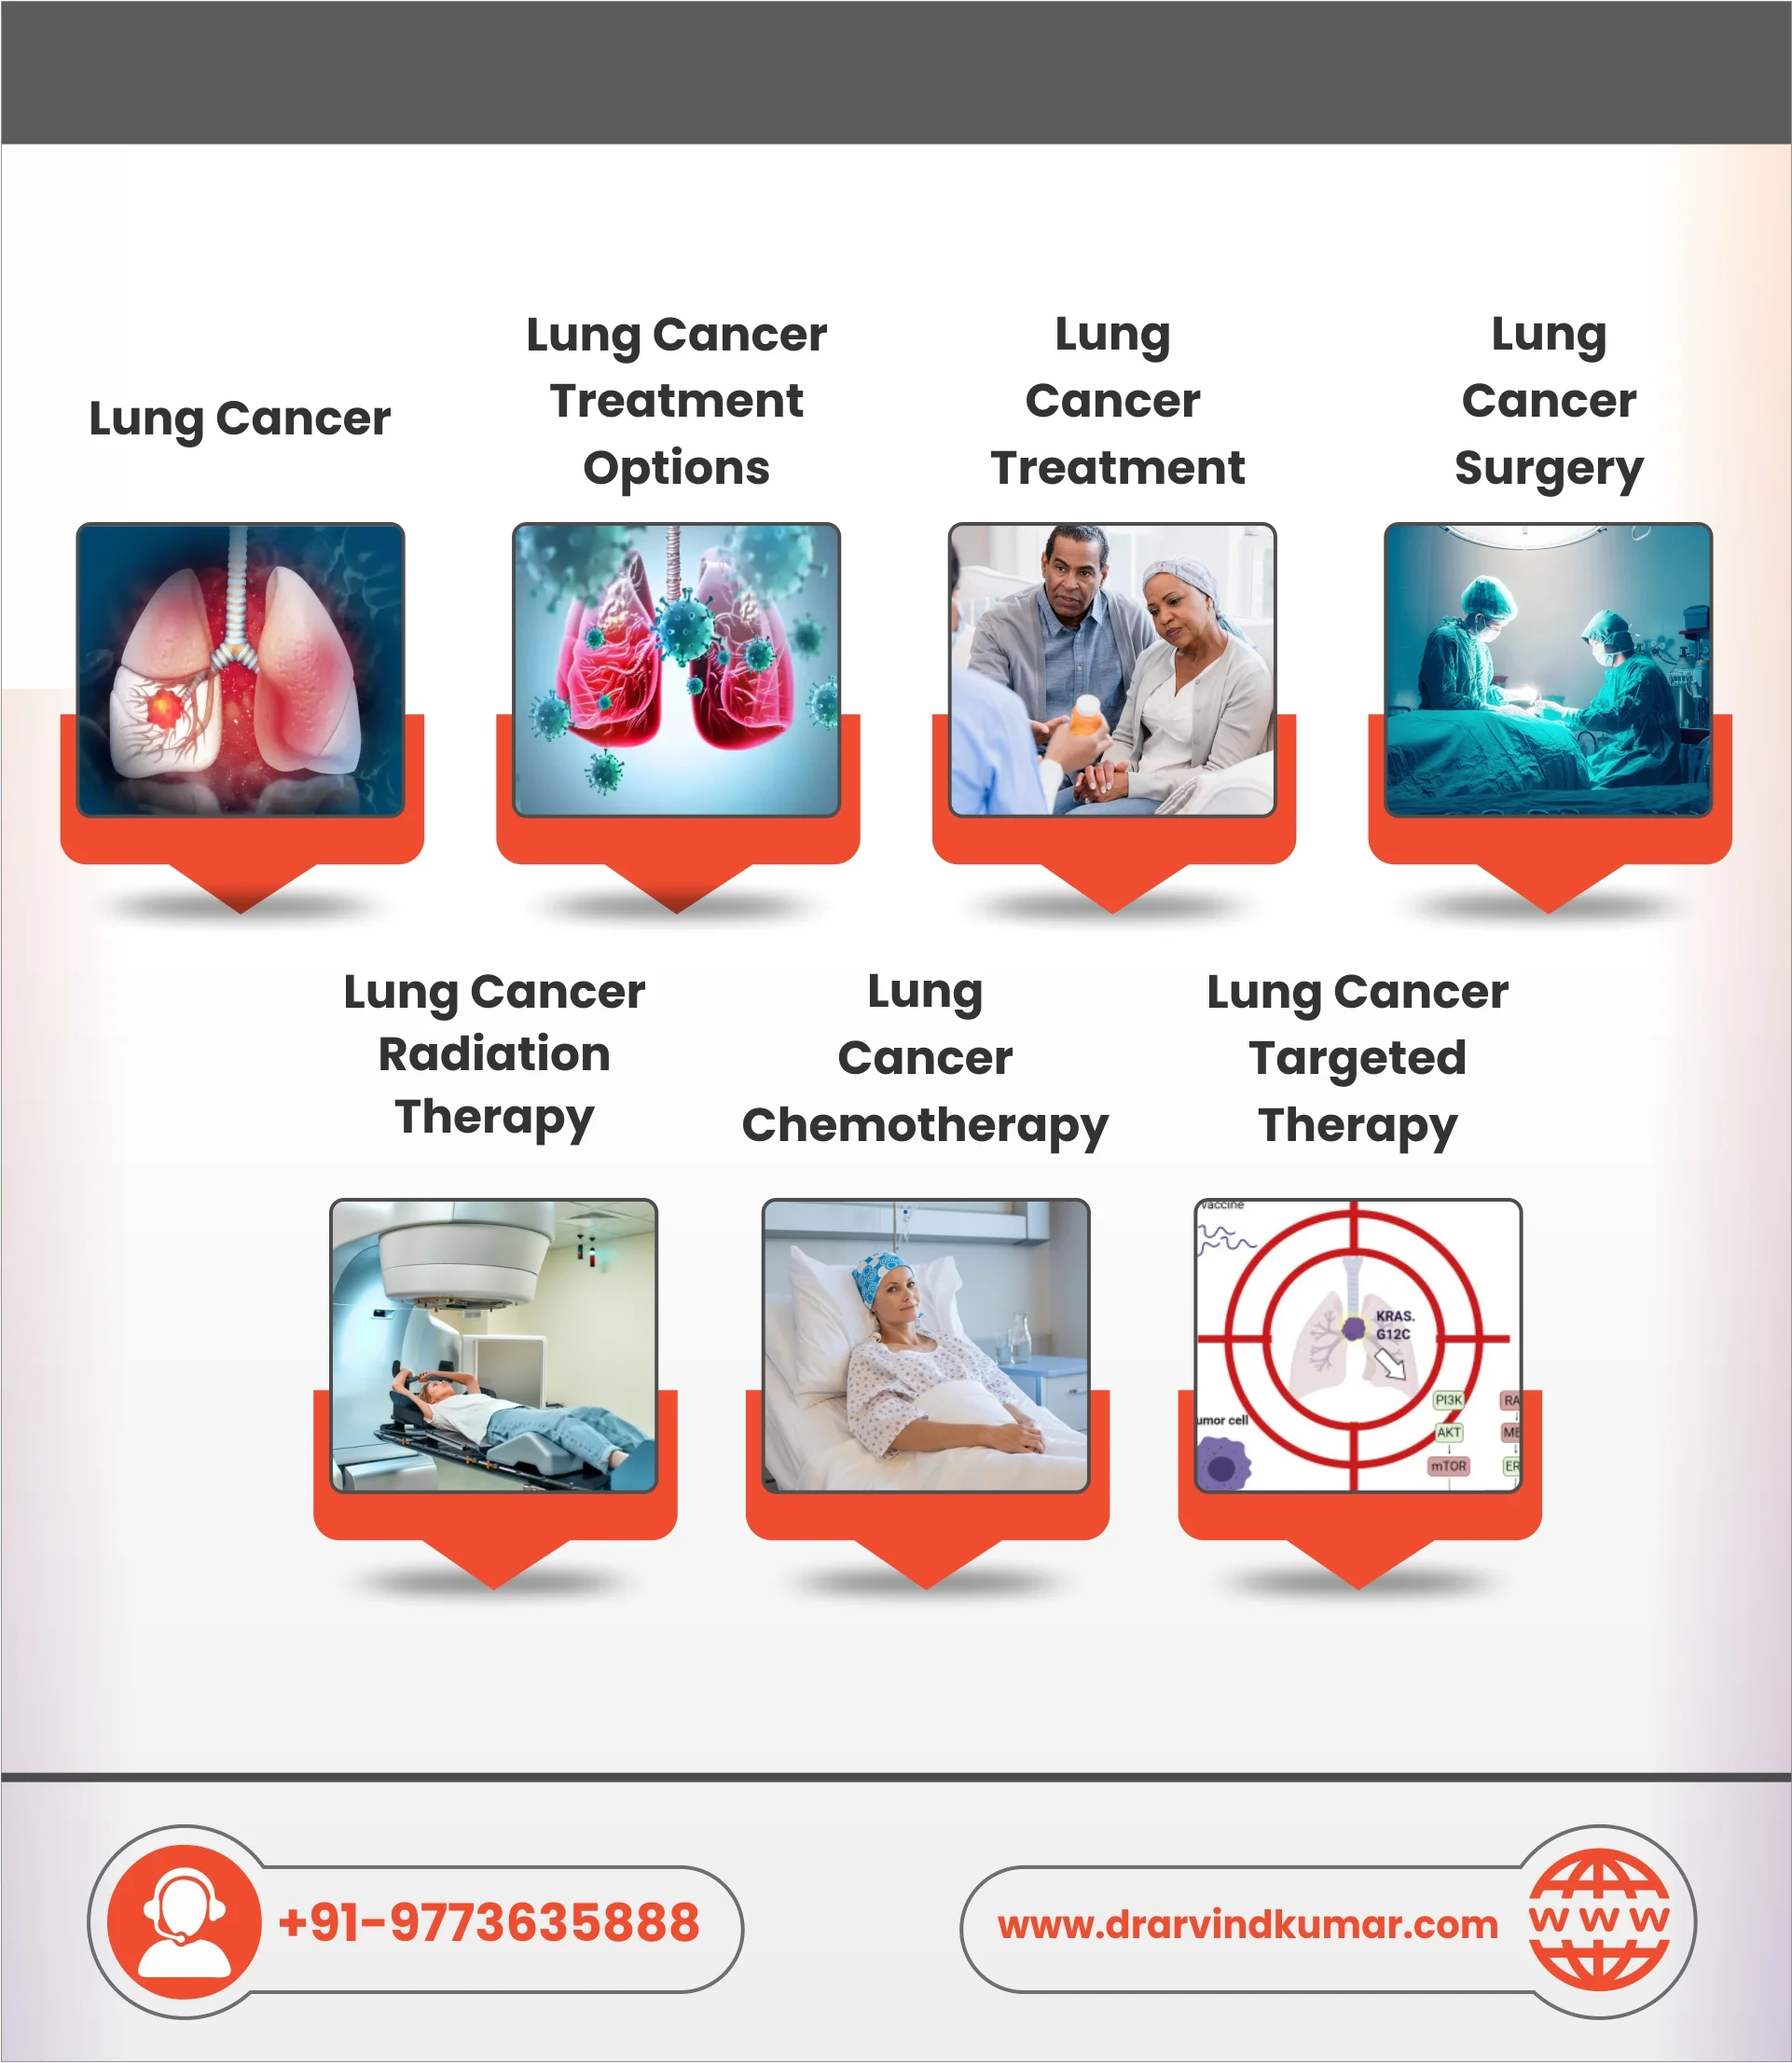 Lung Cancer Treatment Options: Surgery, Radiation, and Chemotherapy